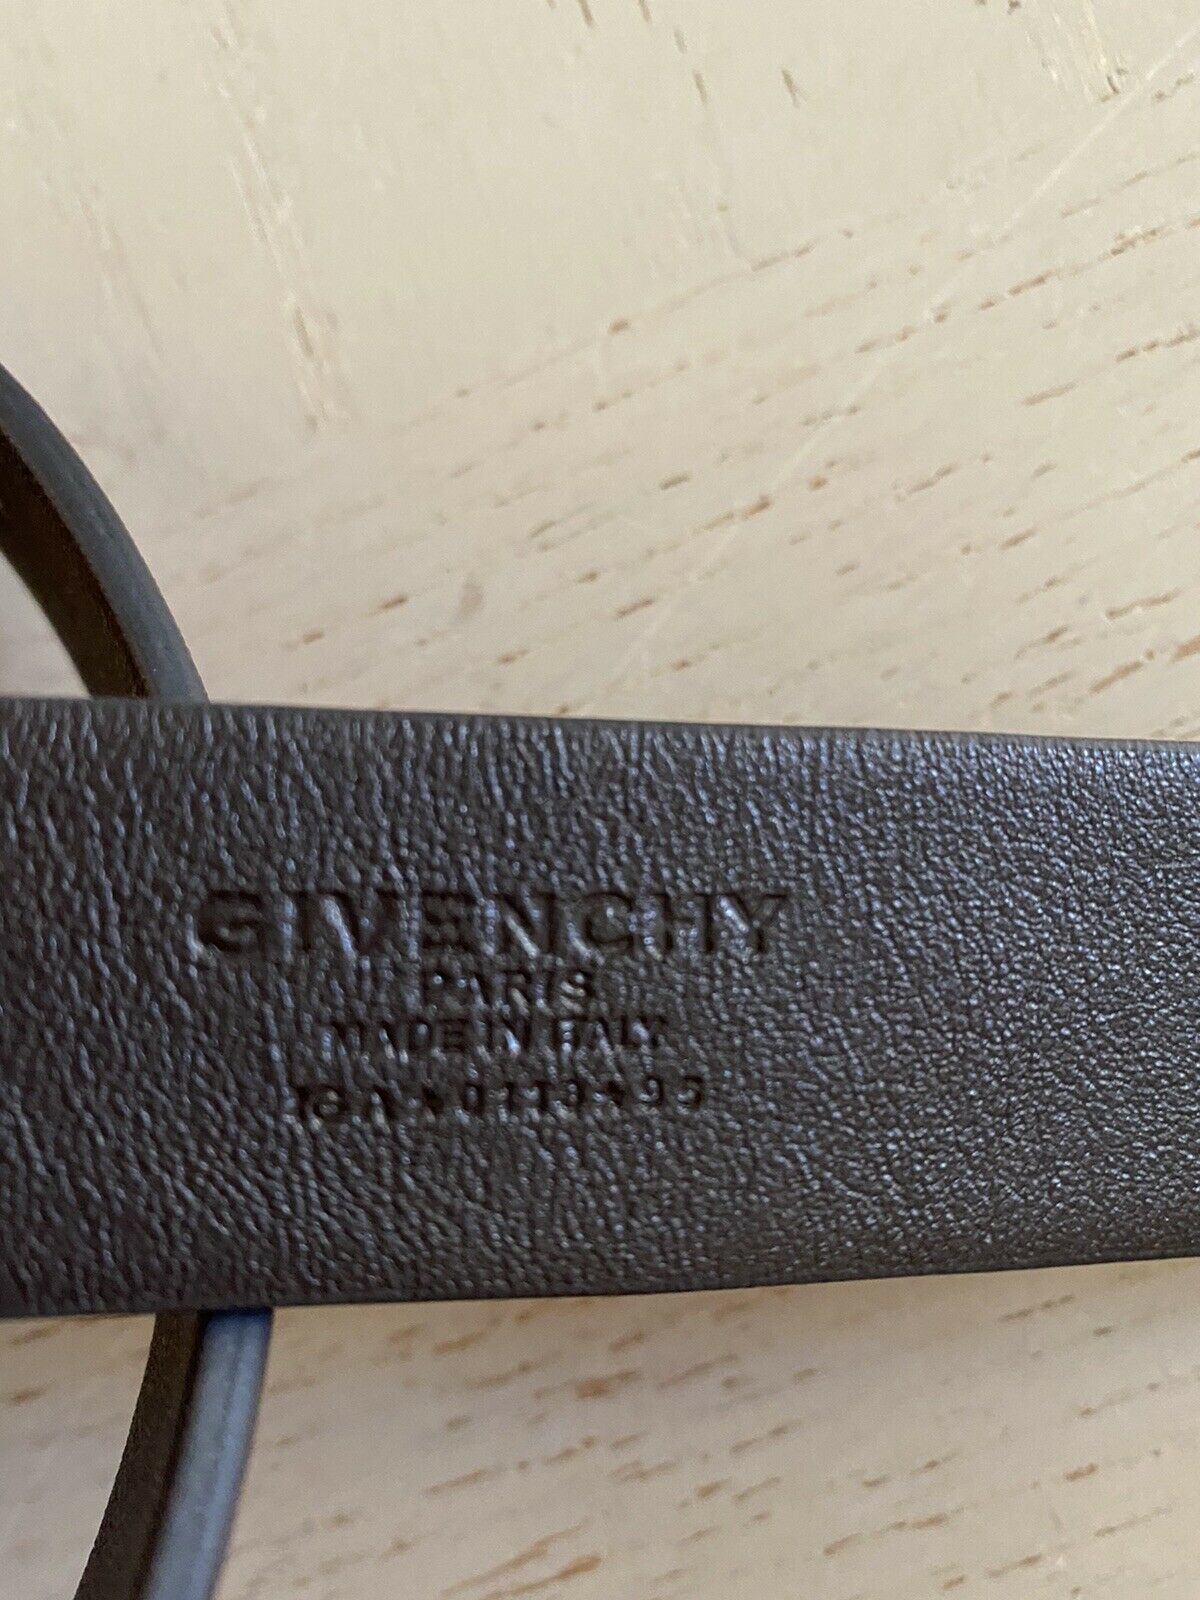 New $550 Givenchy Mens 4-G Engraved Long Genuine Leather Belt Brown 38/95 Italy